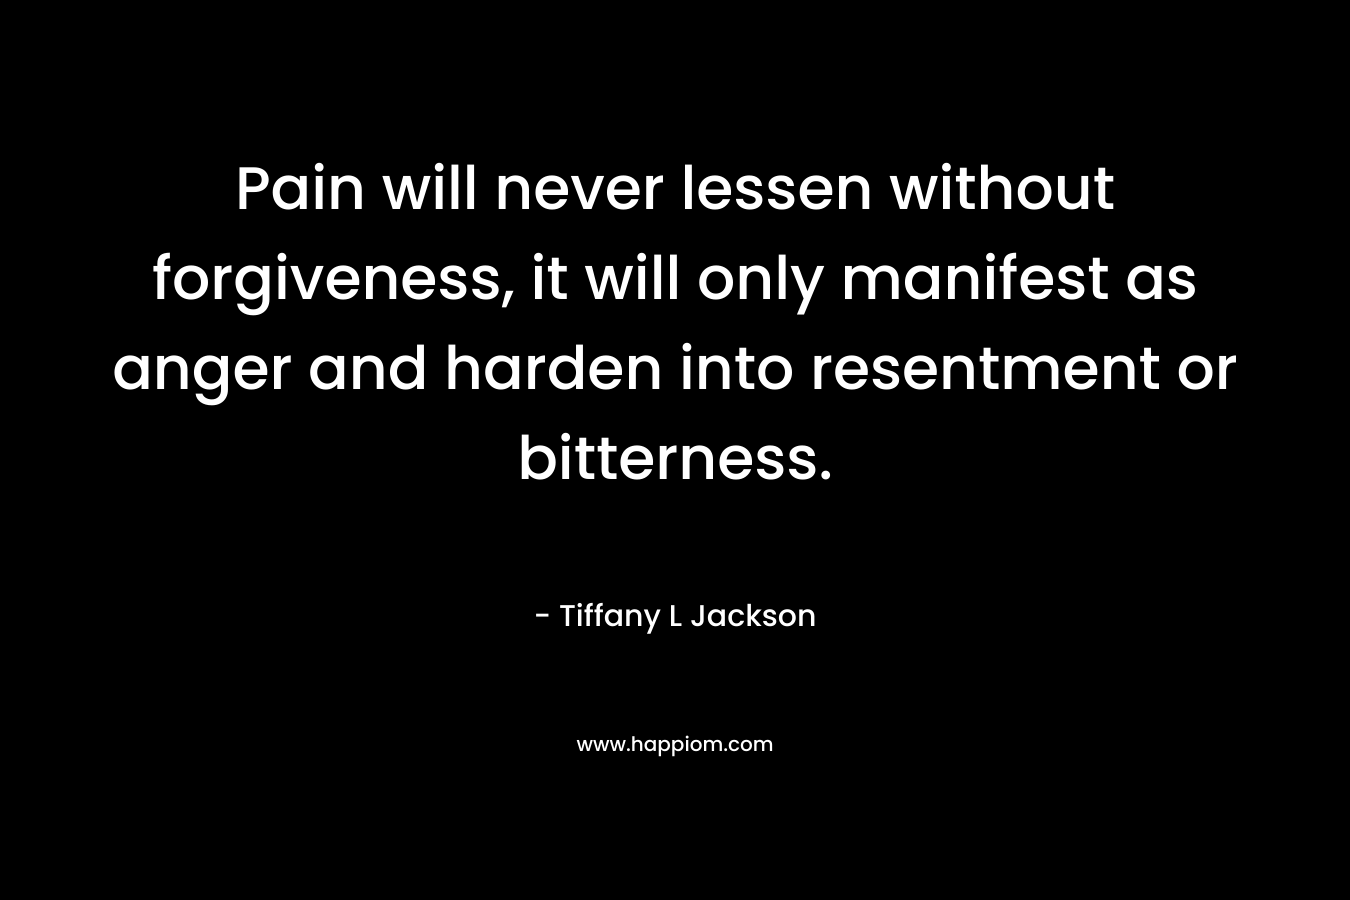 Pain will never lessen without forgiveness, it will only manifest as anger and harden into resentment or bitterness. – Tiffany L Jackson